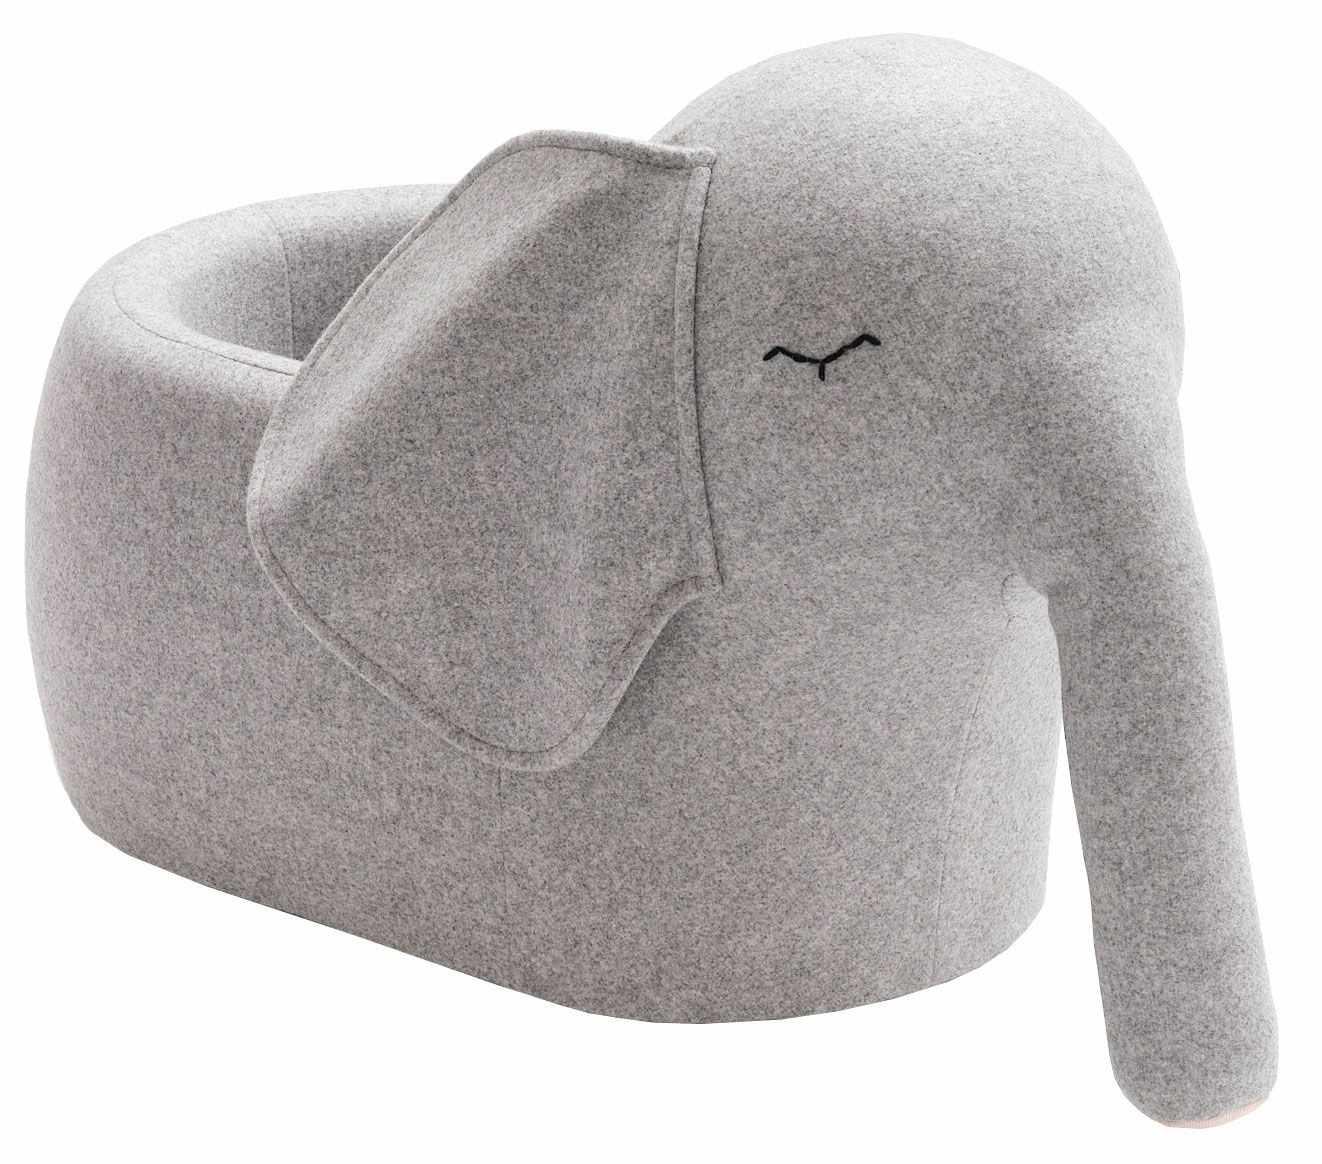 Rolling elephant "Bou" (for children over 12 months) by Bada&bou